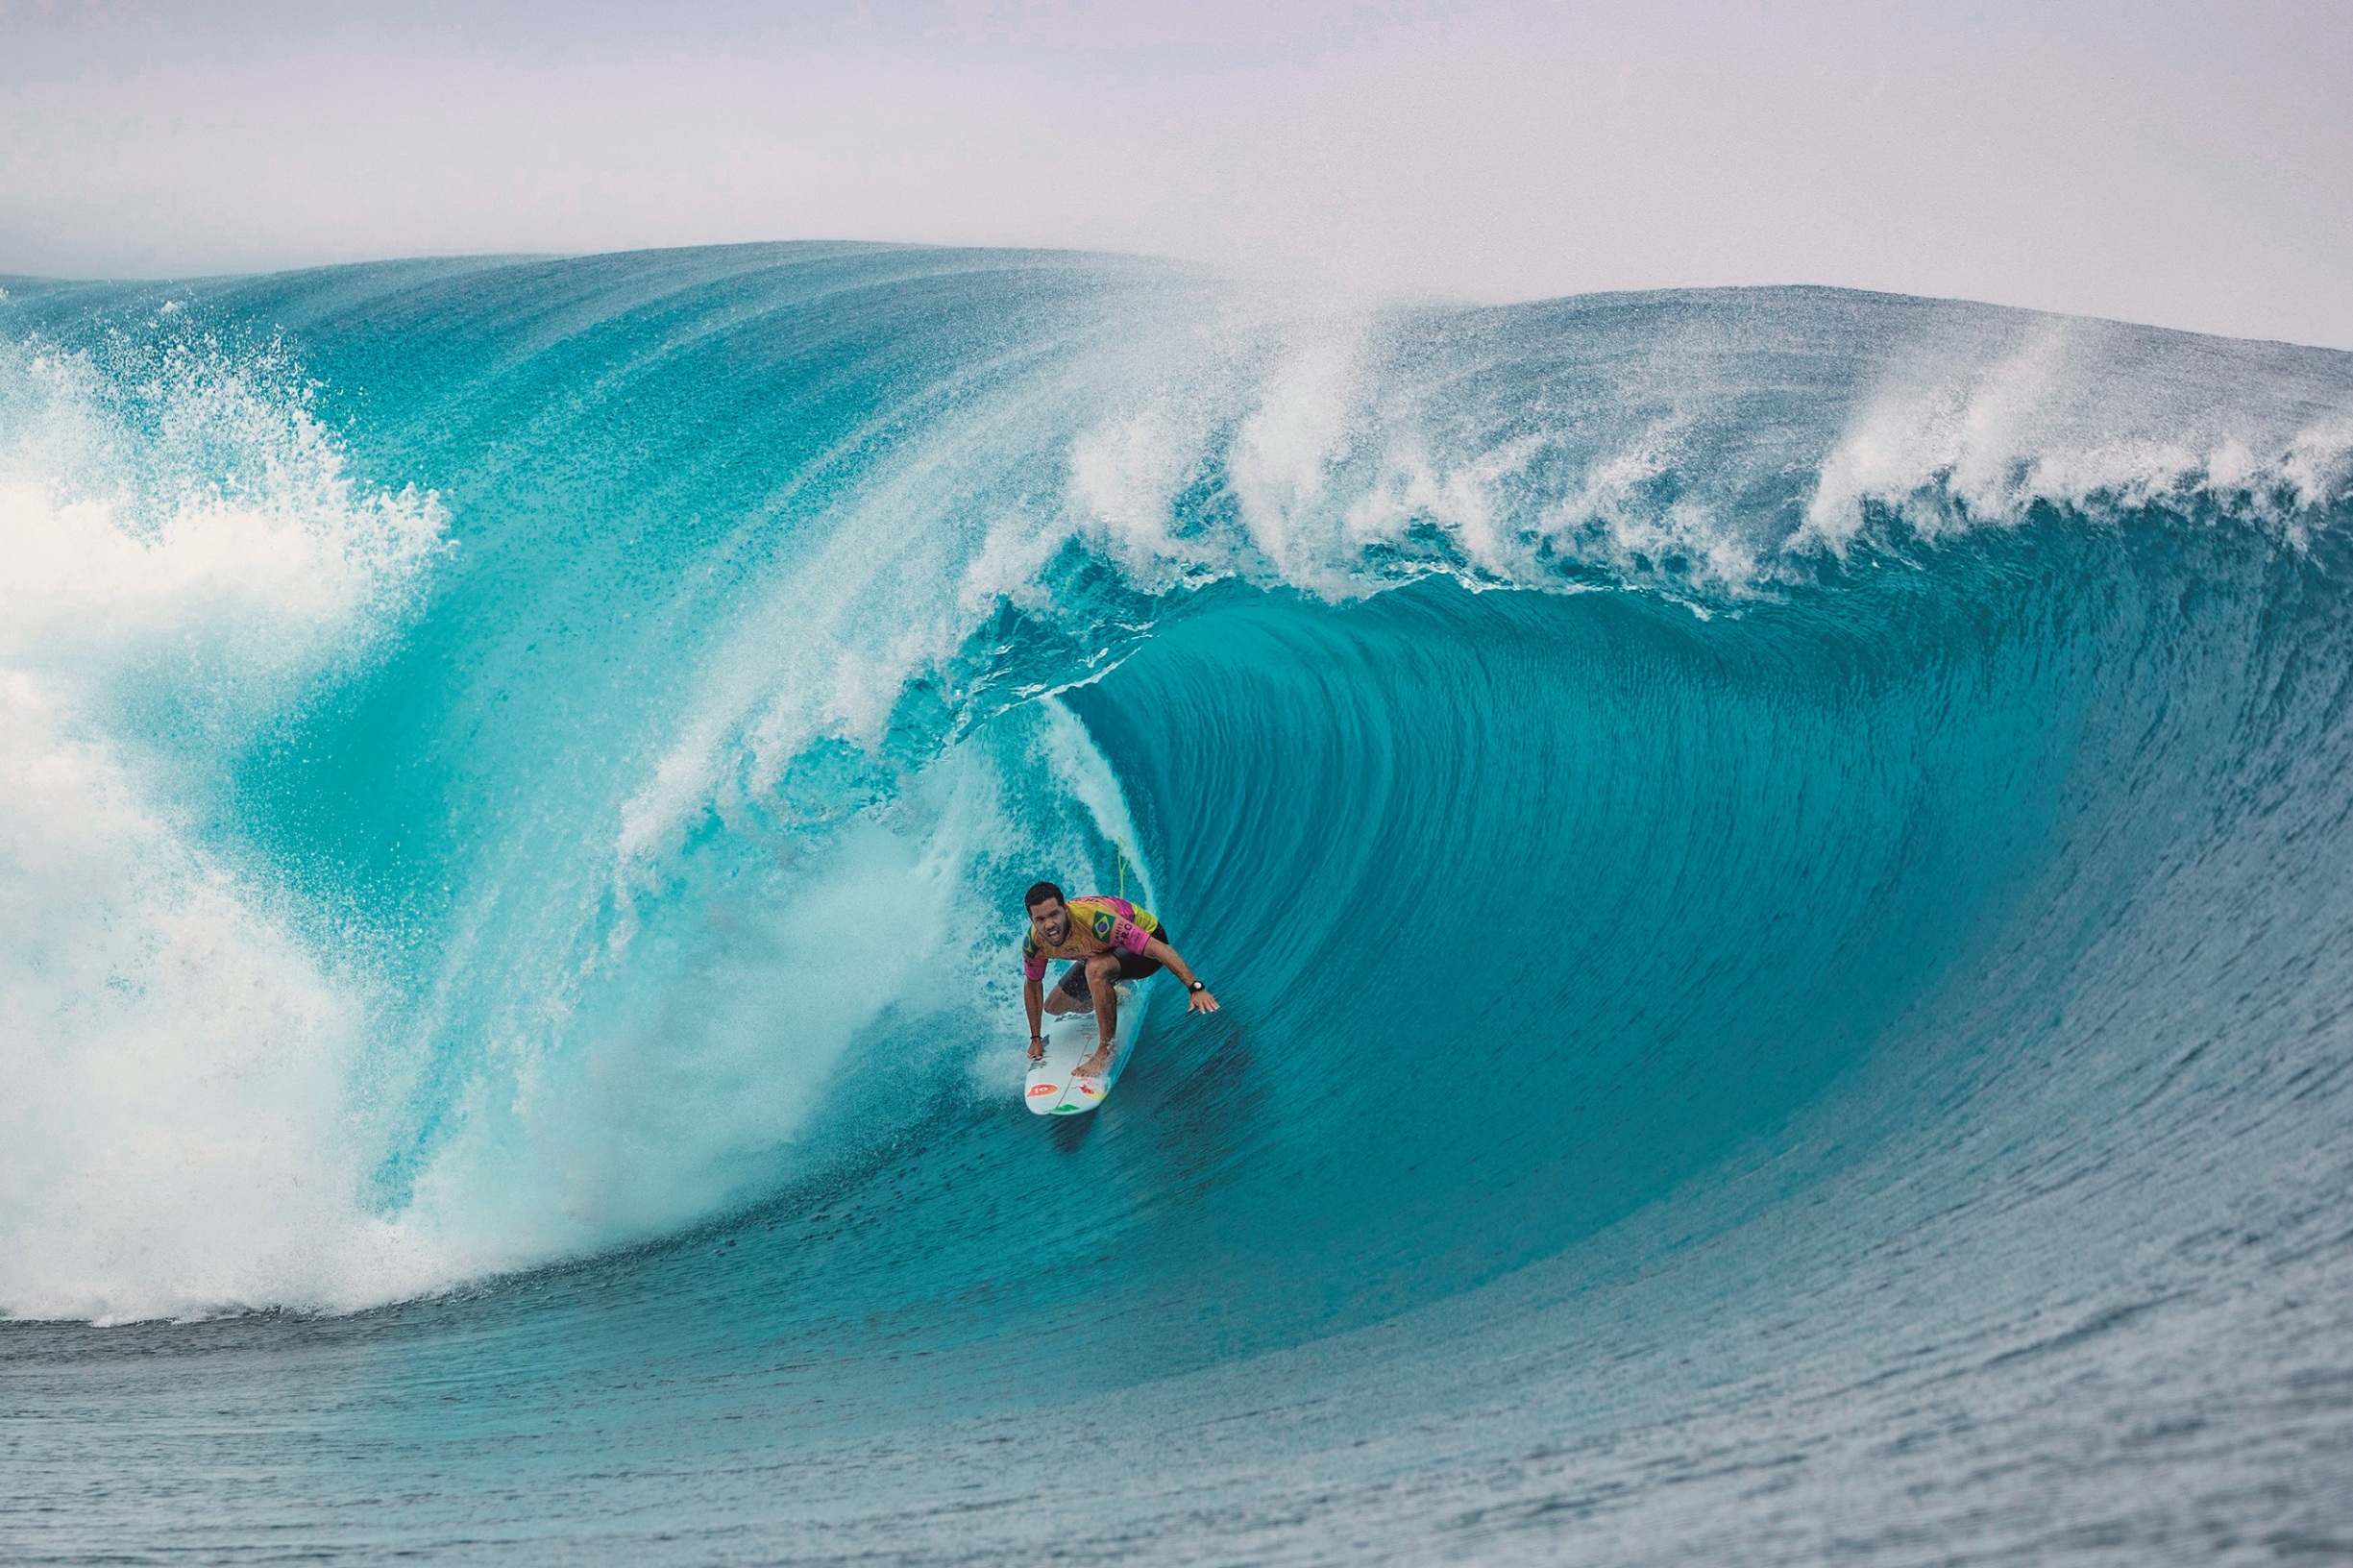 Brazilian surfer Adriano De Souza competes on the third day of the 2019 Tahiti Pro at Teahupoo, Tahiti, on August 28, 2019., Image: 467626117, License: Rights-managed, Restrictions: RESTRICTED TO EDITORIAL USE, Model Release: no, Credit line: brian bielmann / AFP / Profimedia